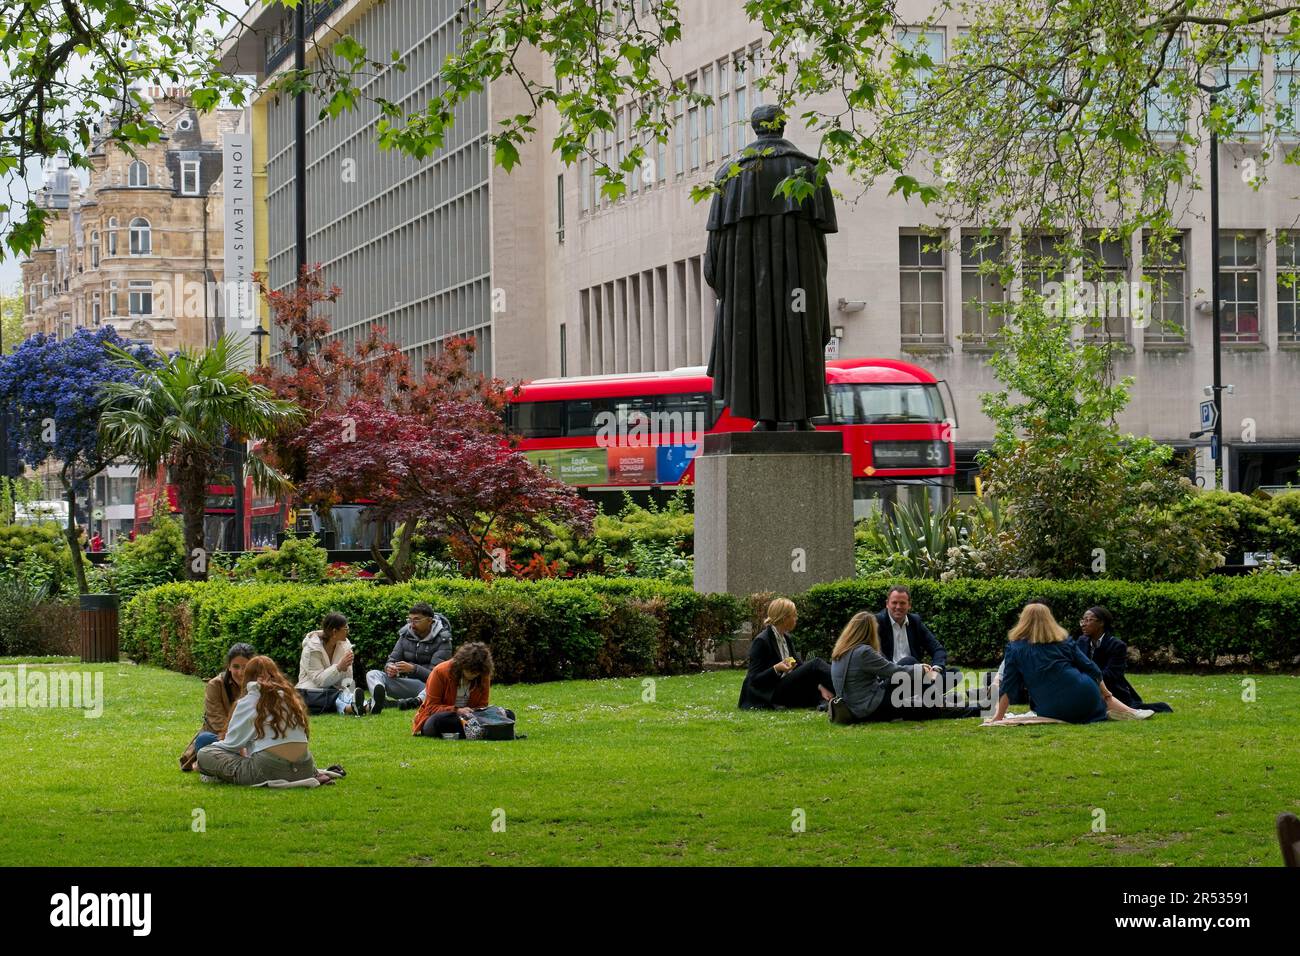 Cavendish Square London W1 England UK Sunshine with people sitting on grass below statue of Lord George Bentinck. Buildings and traffic behind. Stock Photo